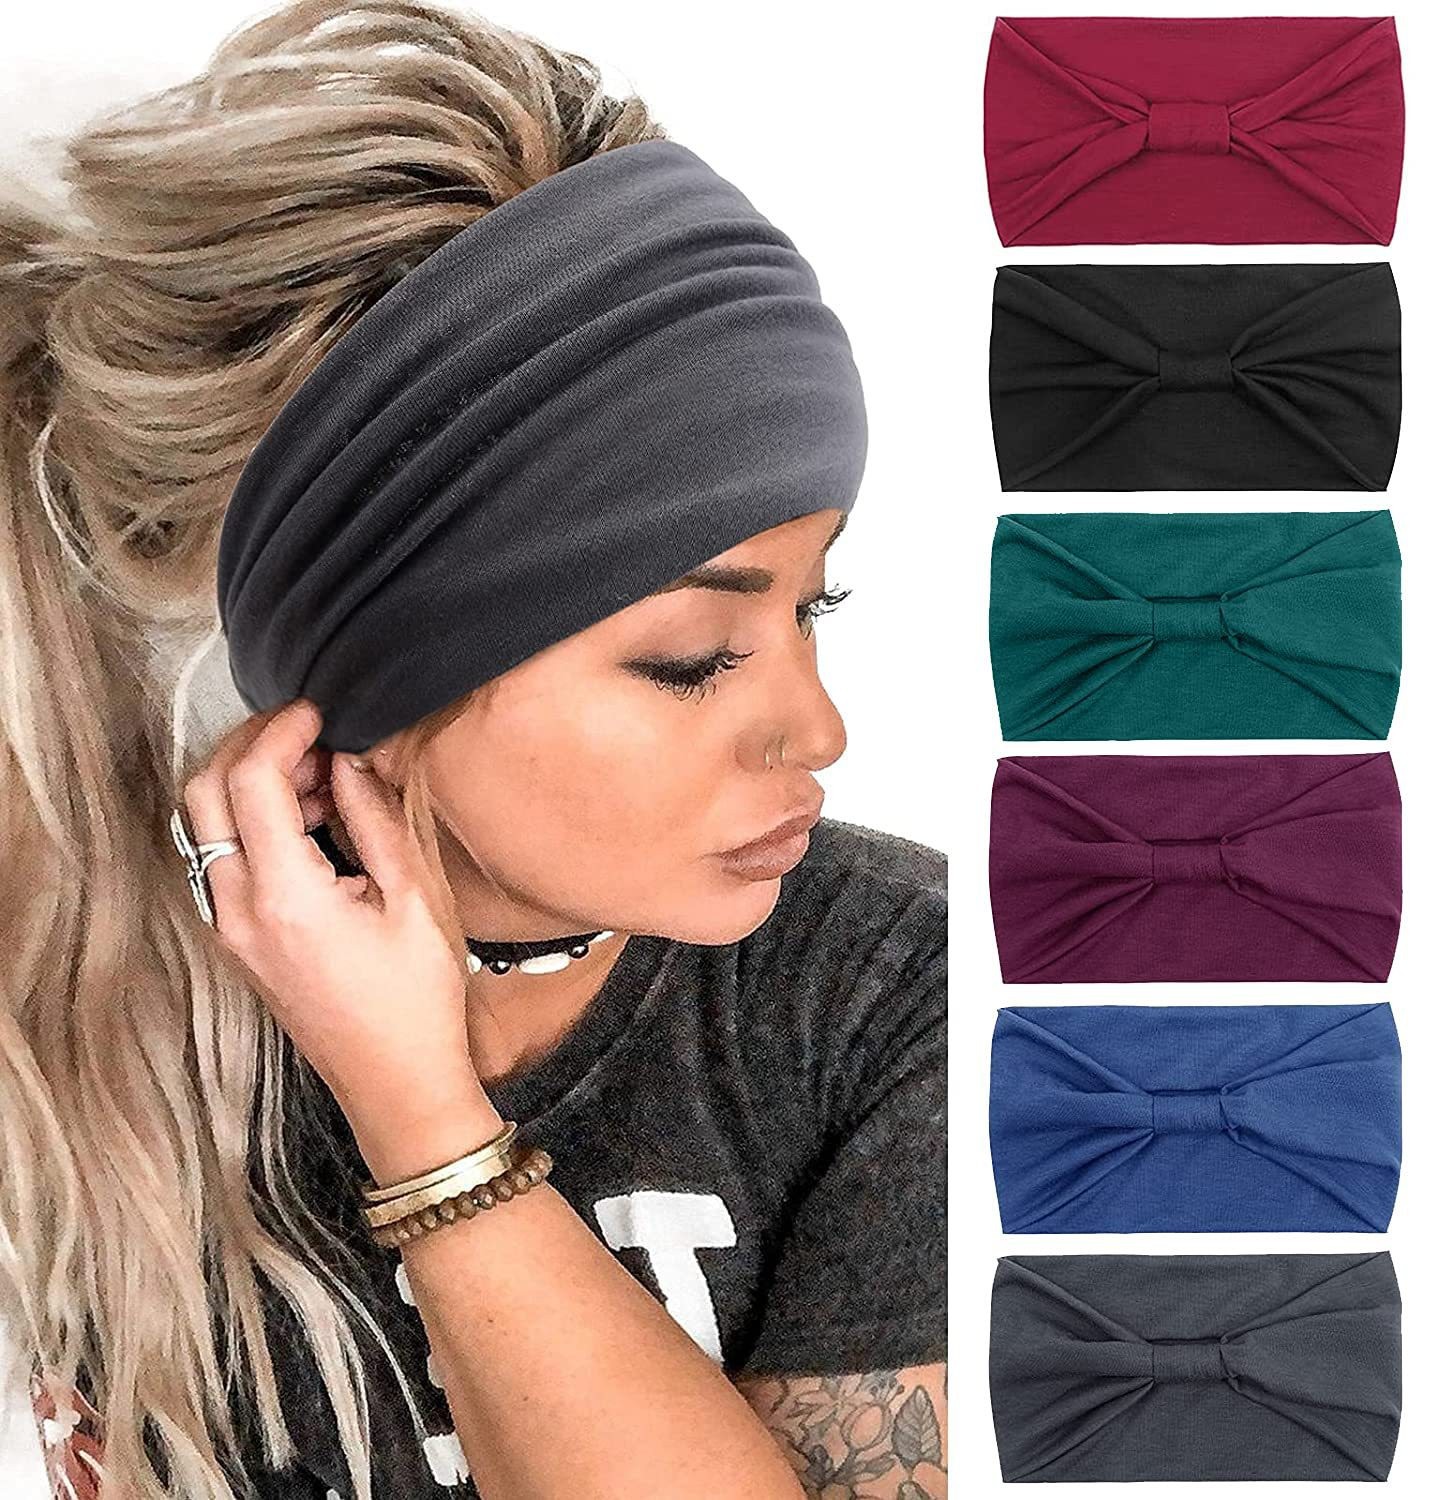 Amazon Women's Sports Yoga Hair Band All-Match Knotted Headband Wide-Brimmed Headscarf Elastic Cotton Hair Accessories